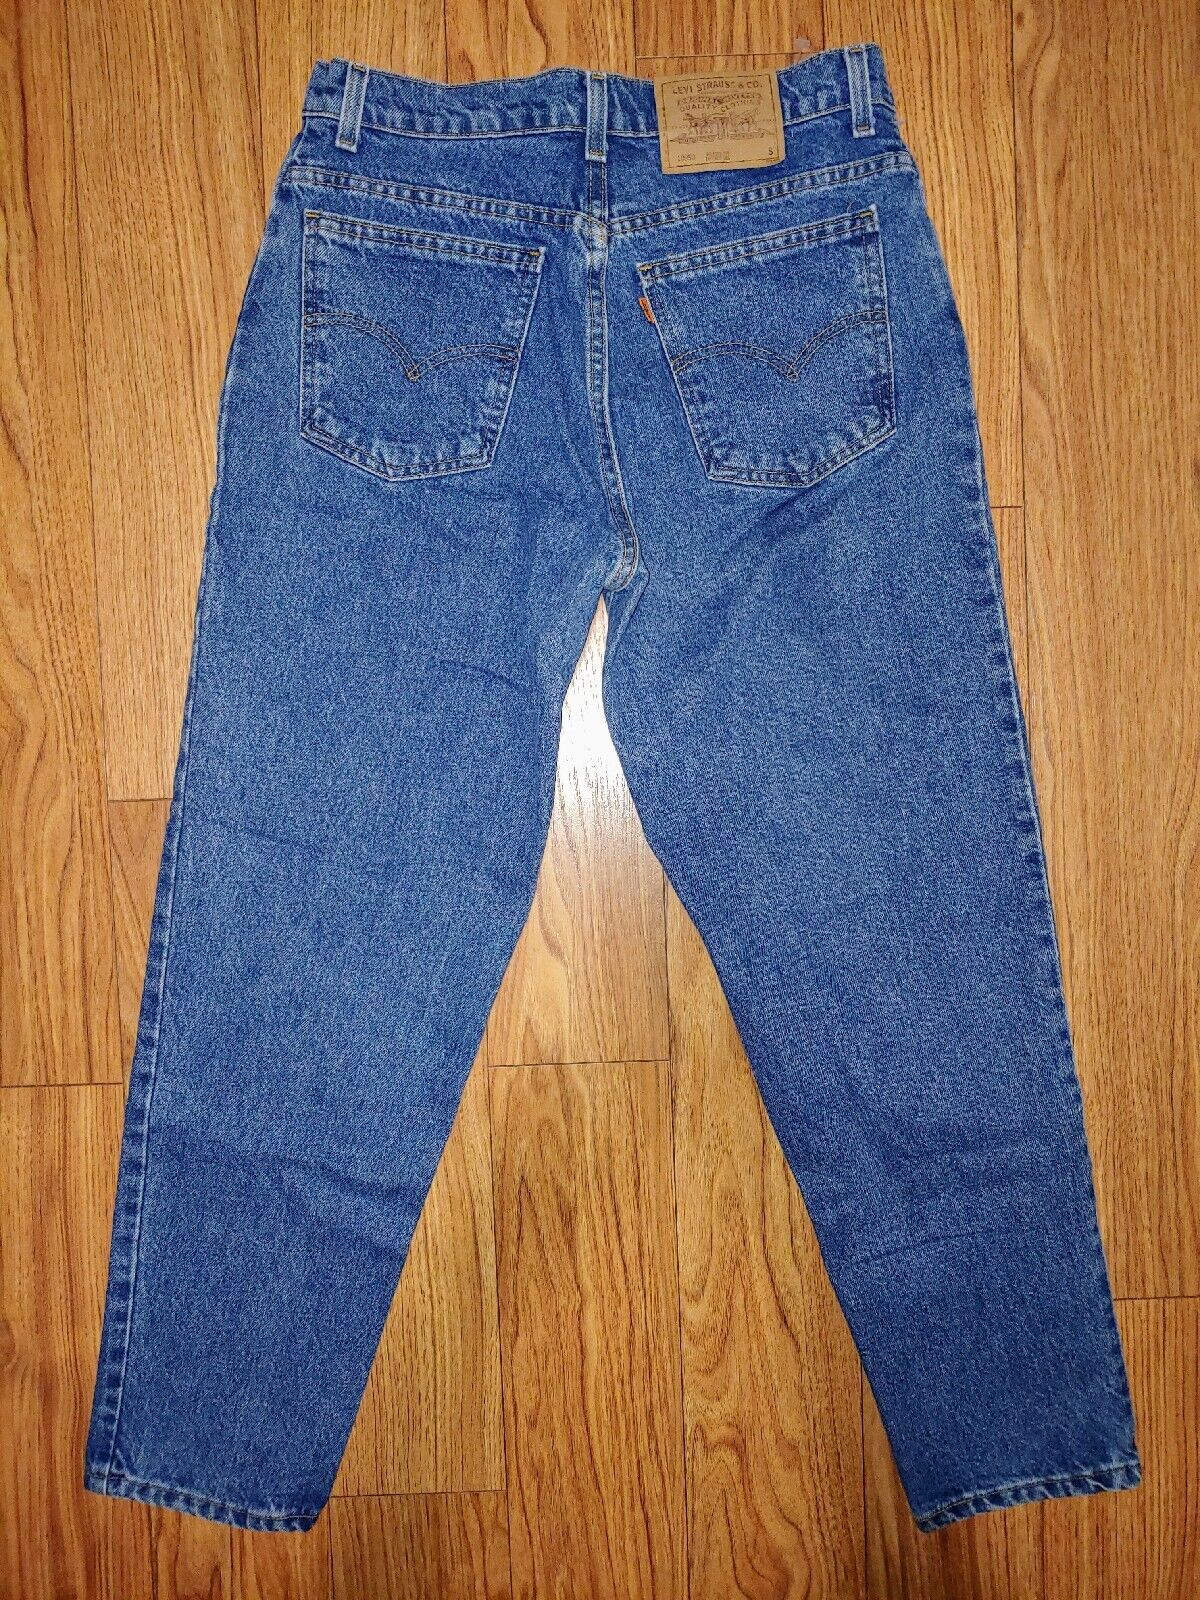 Levi's 550 Vintage 90's Light Wash High Rise Mom Jeans Relaxed Tapered Leg  Sz 6 - Jeans